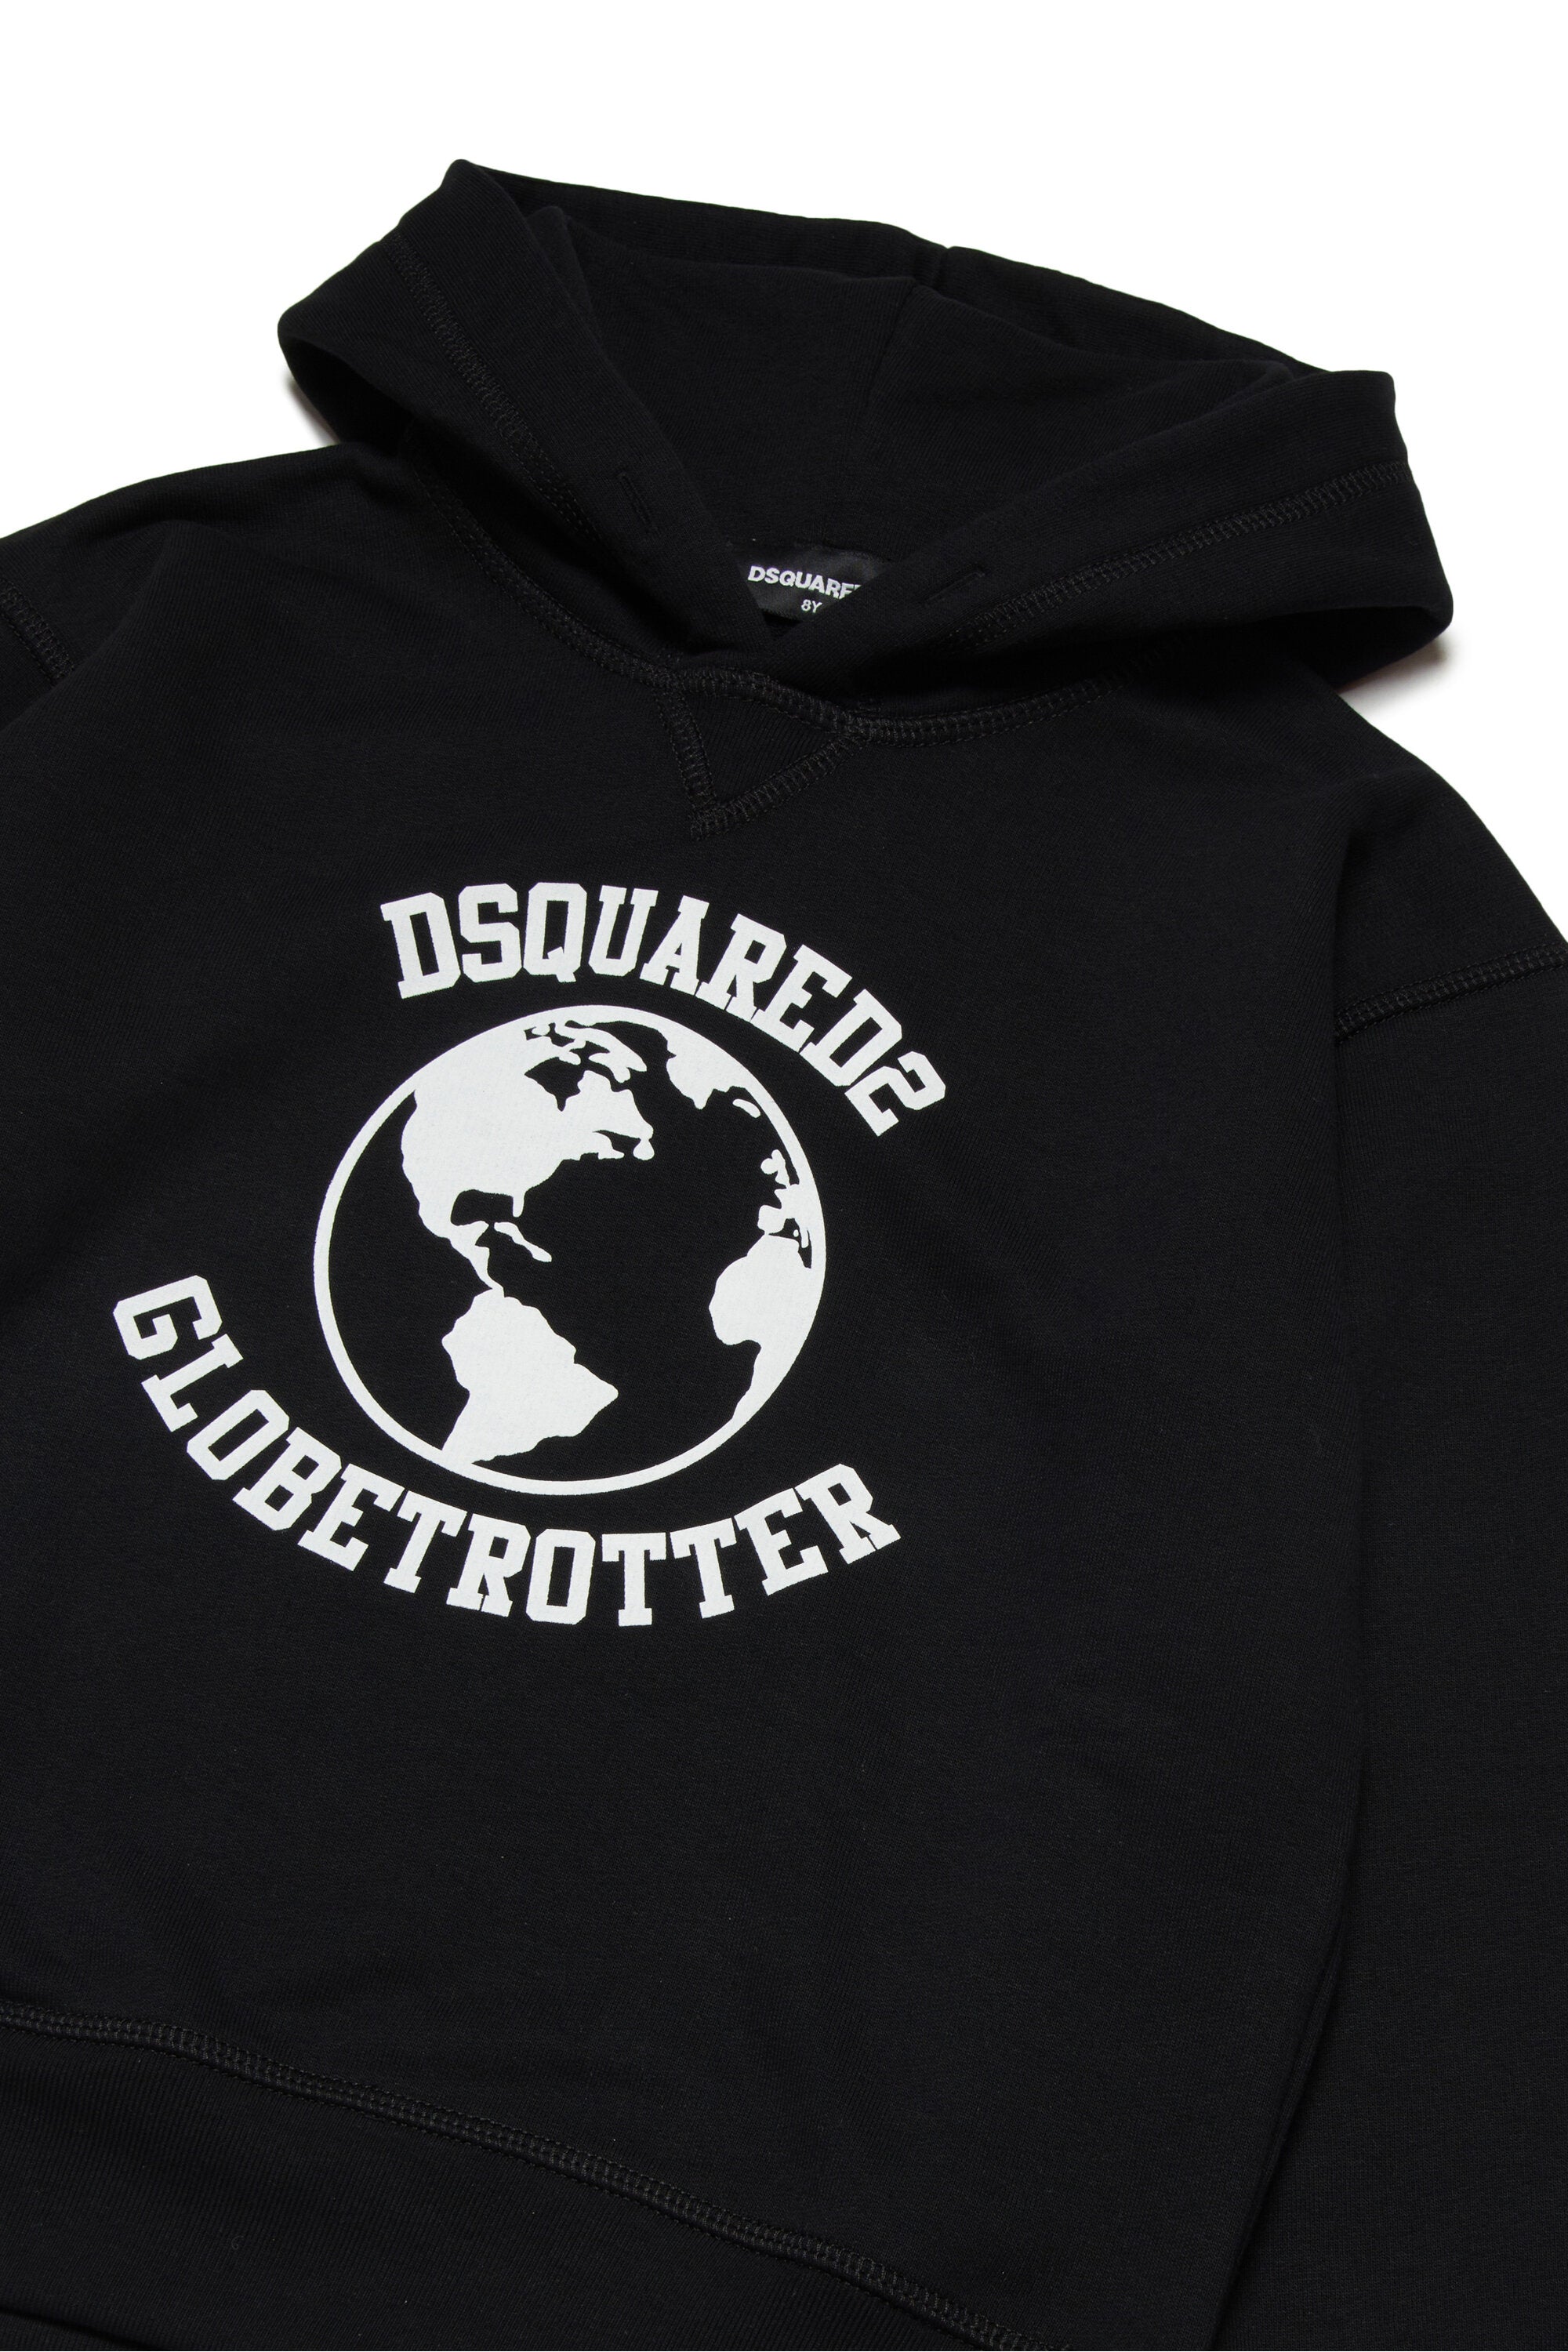 Cotton hooded sweatshirt with Globetrotter graphics